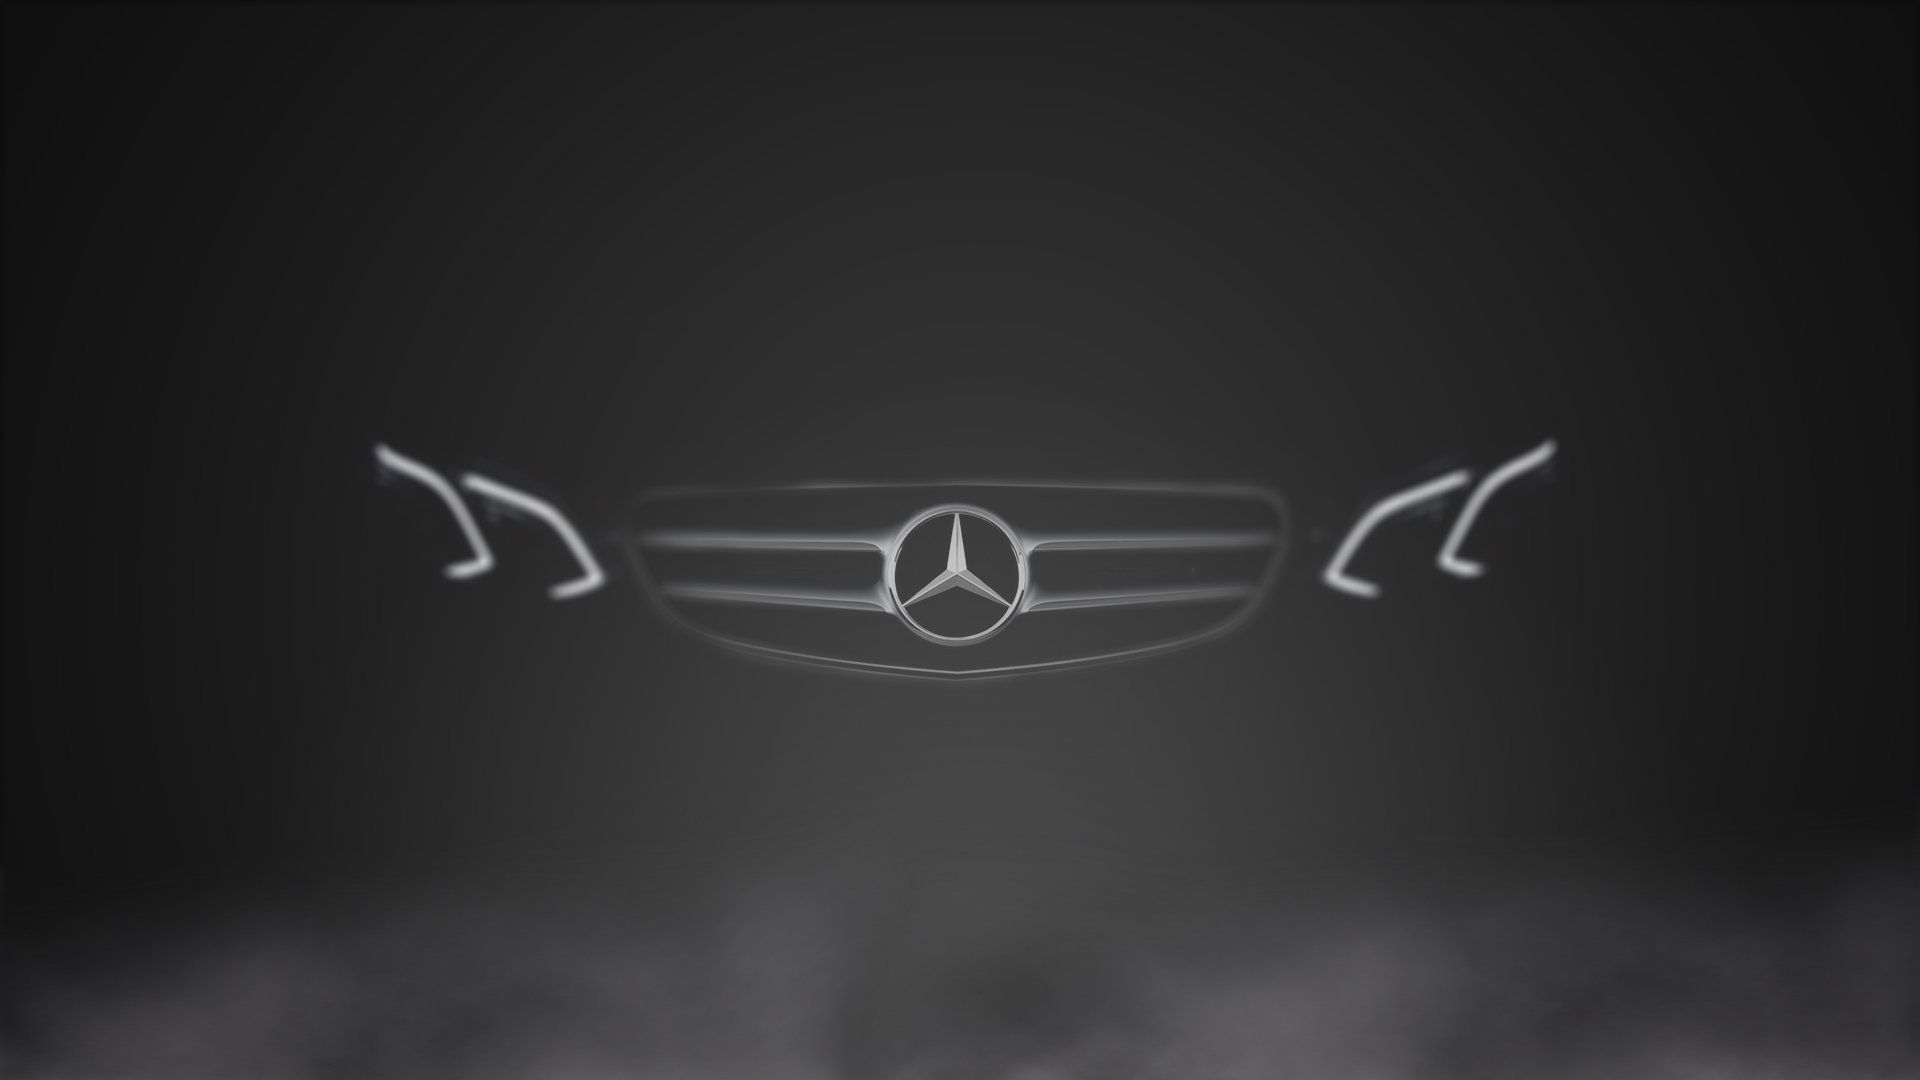 Mercedes Benz Wallpapers on